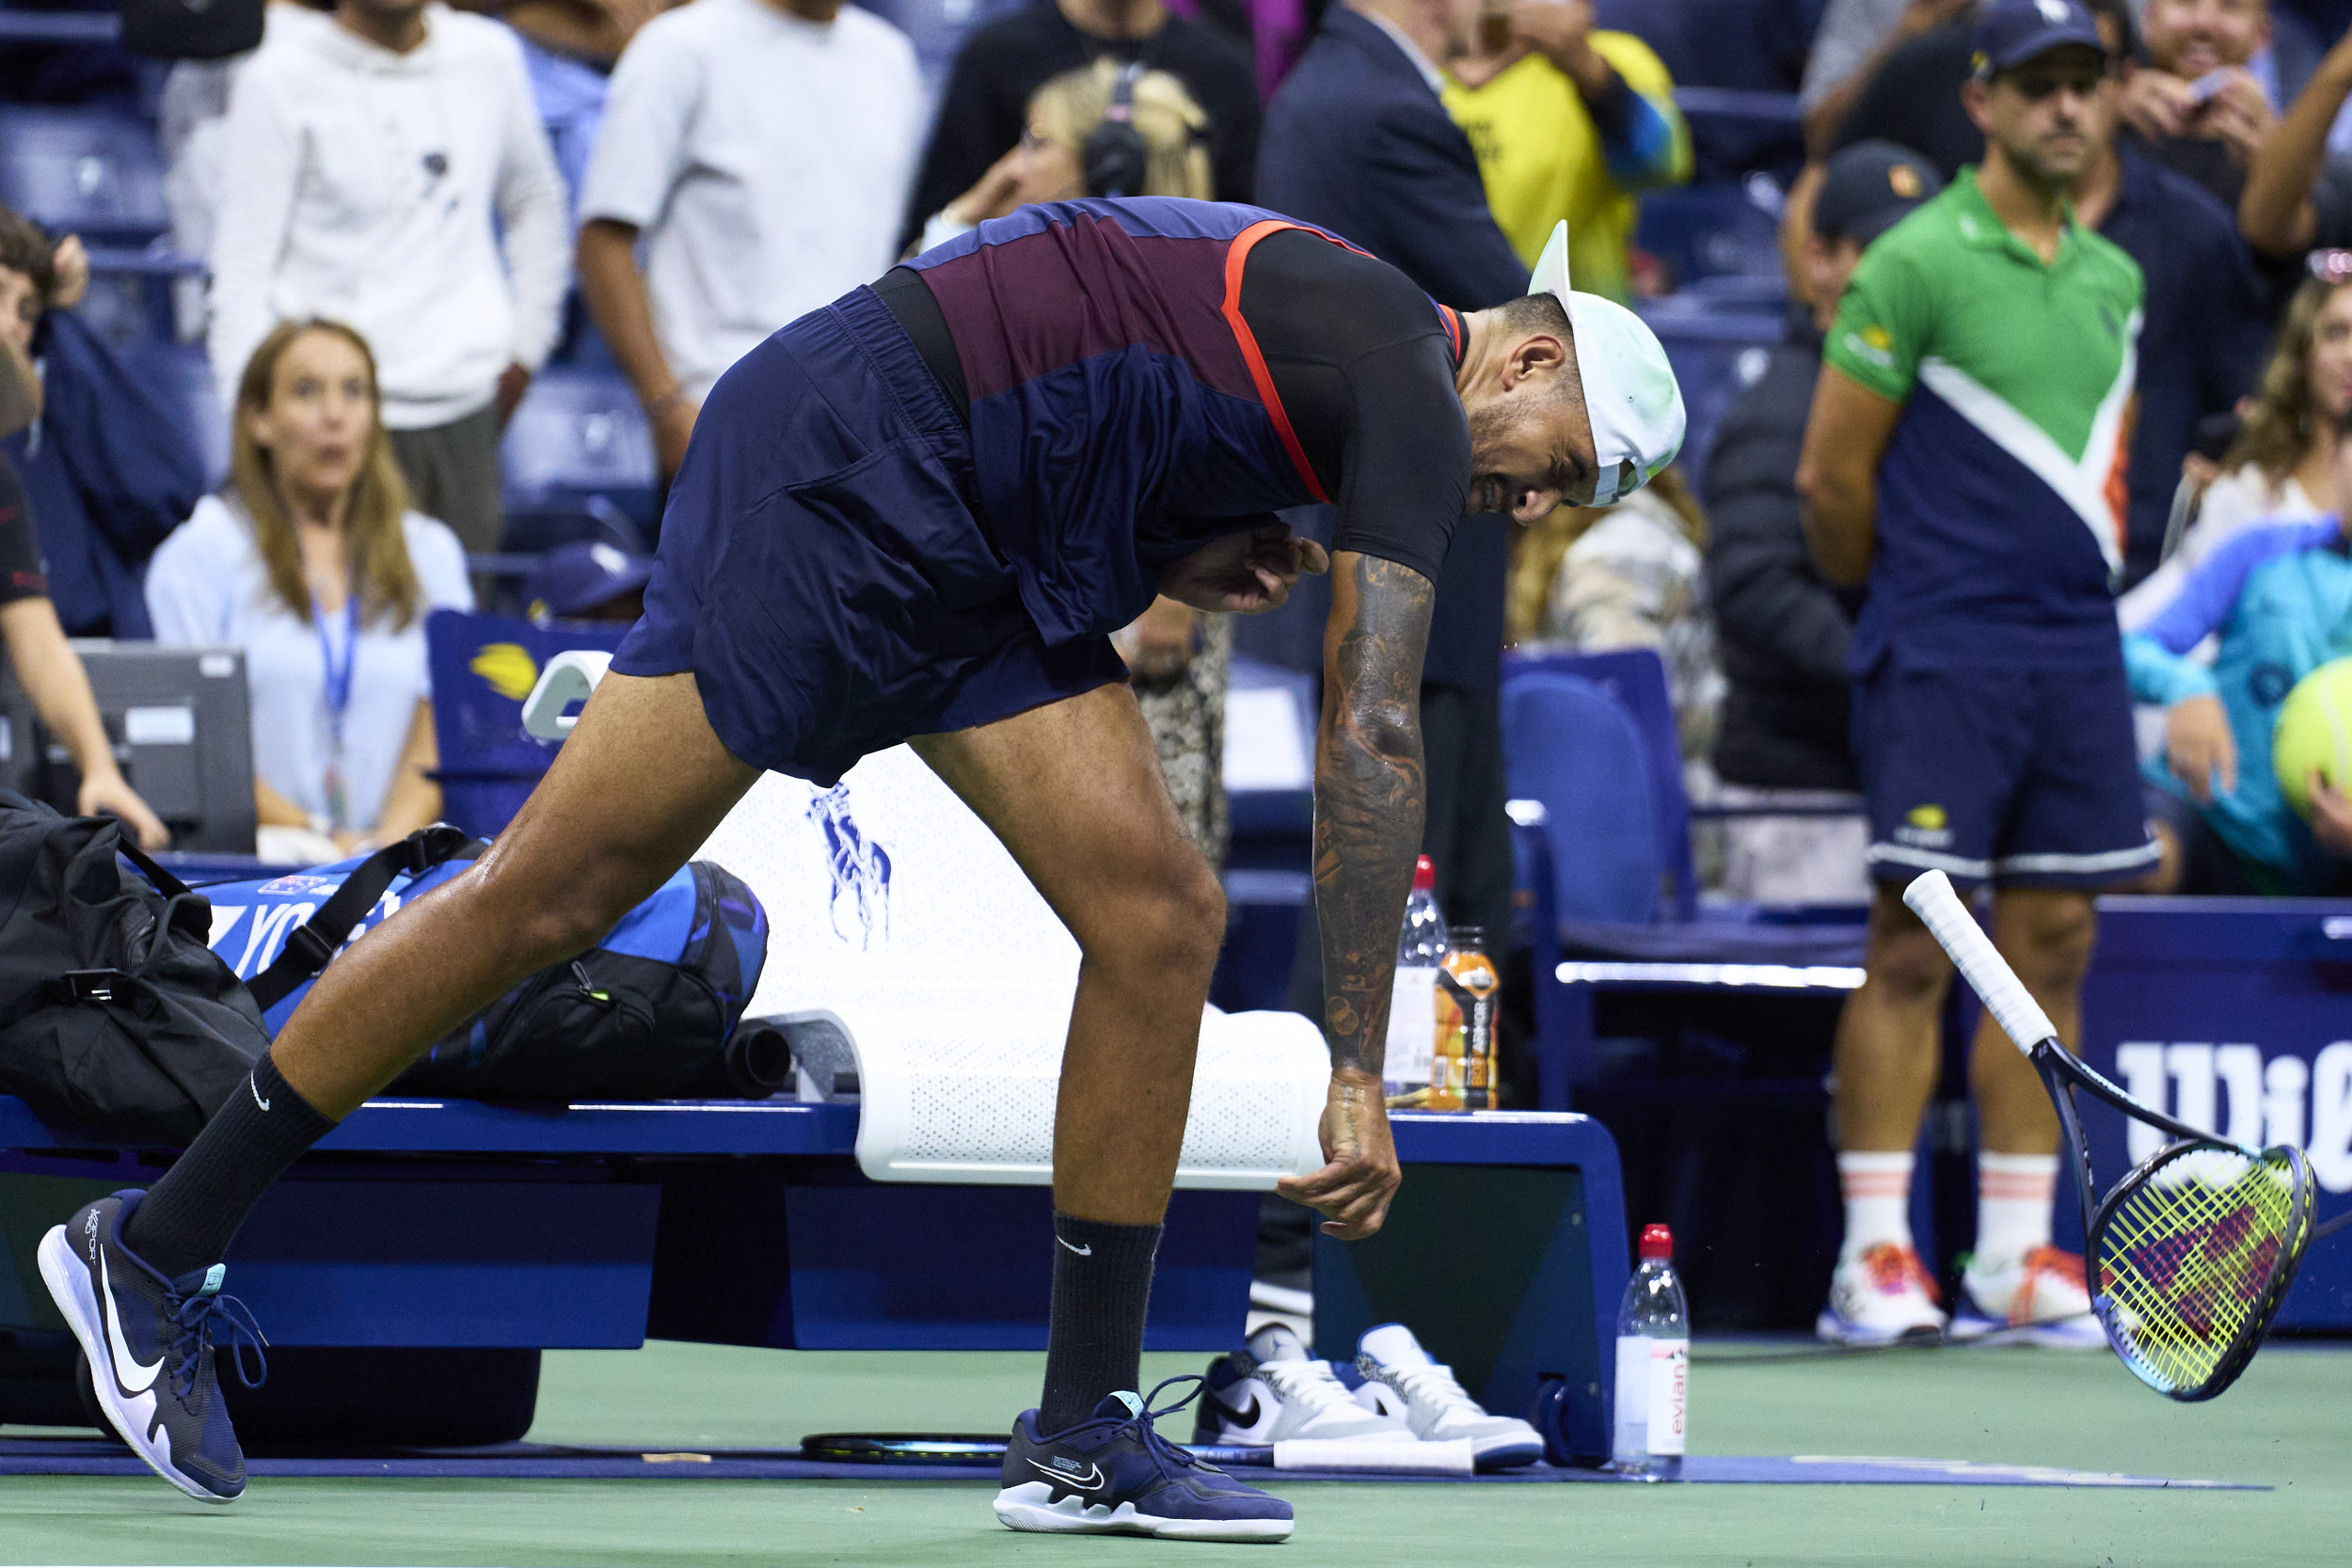 SEE IT: Nick Kyrgios smashes tennis rackets after U.S. Open loss